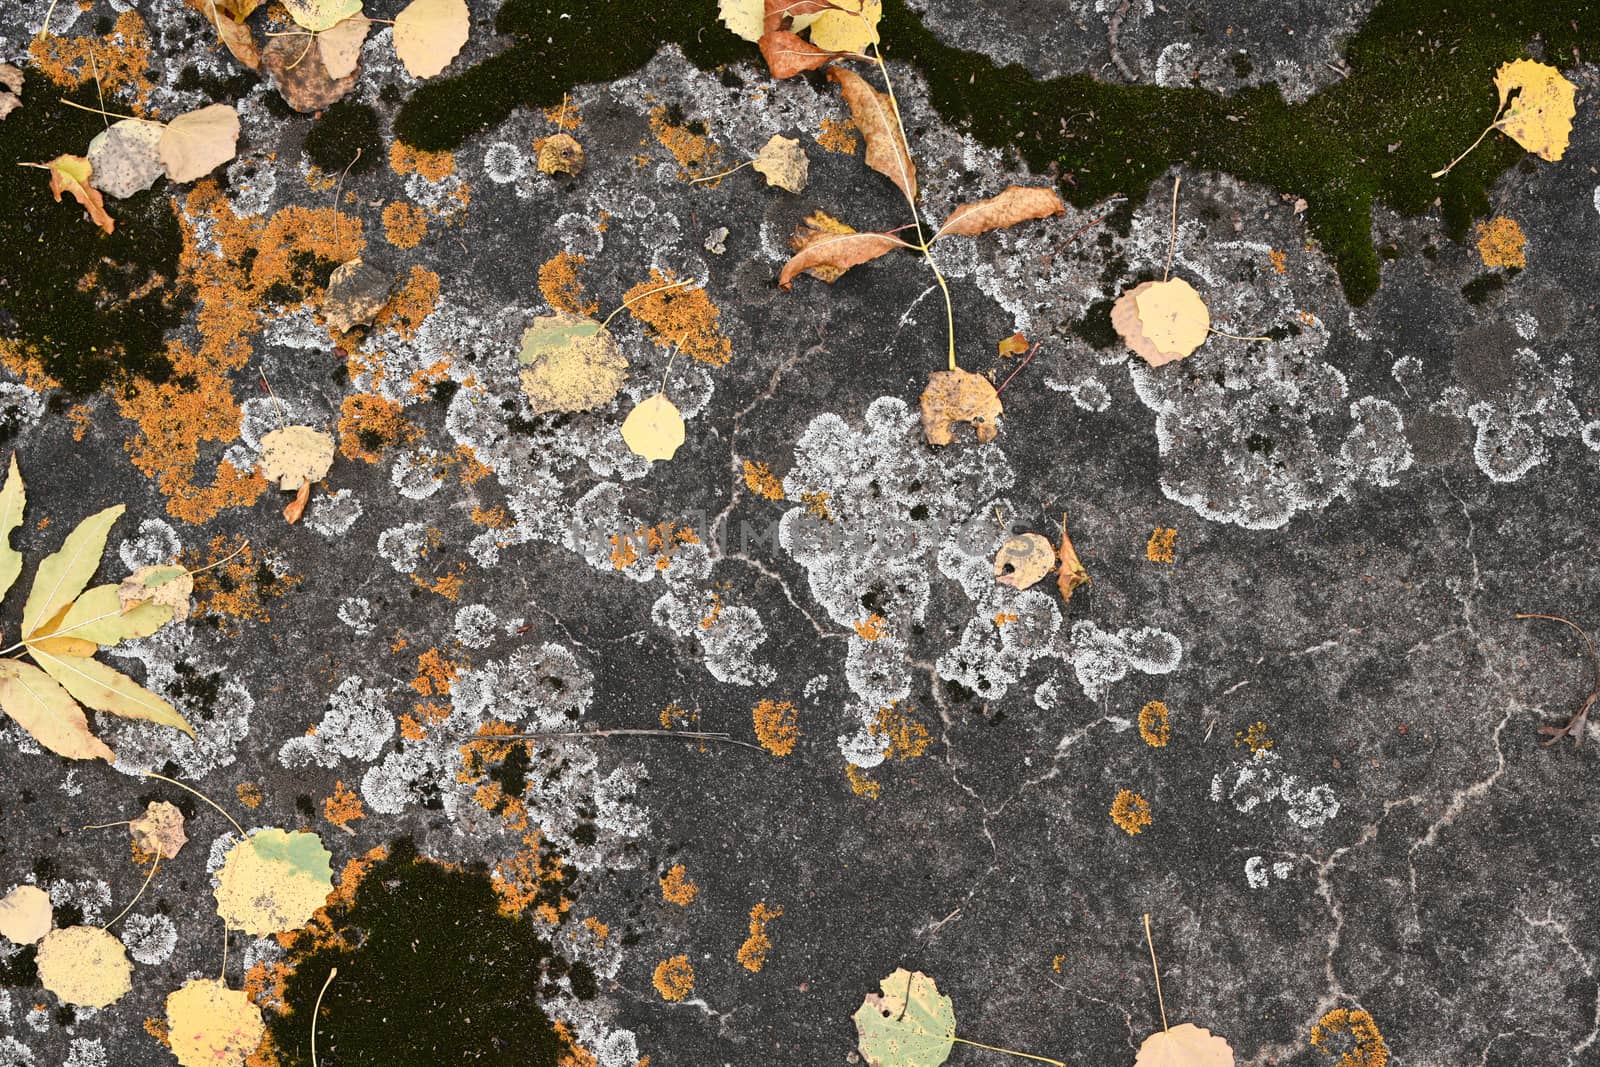 fallen leaves on the concrete pavement In autumn by sashokddt